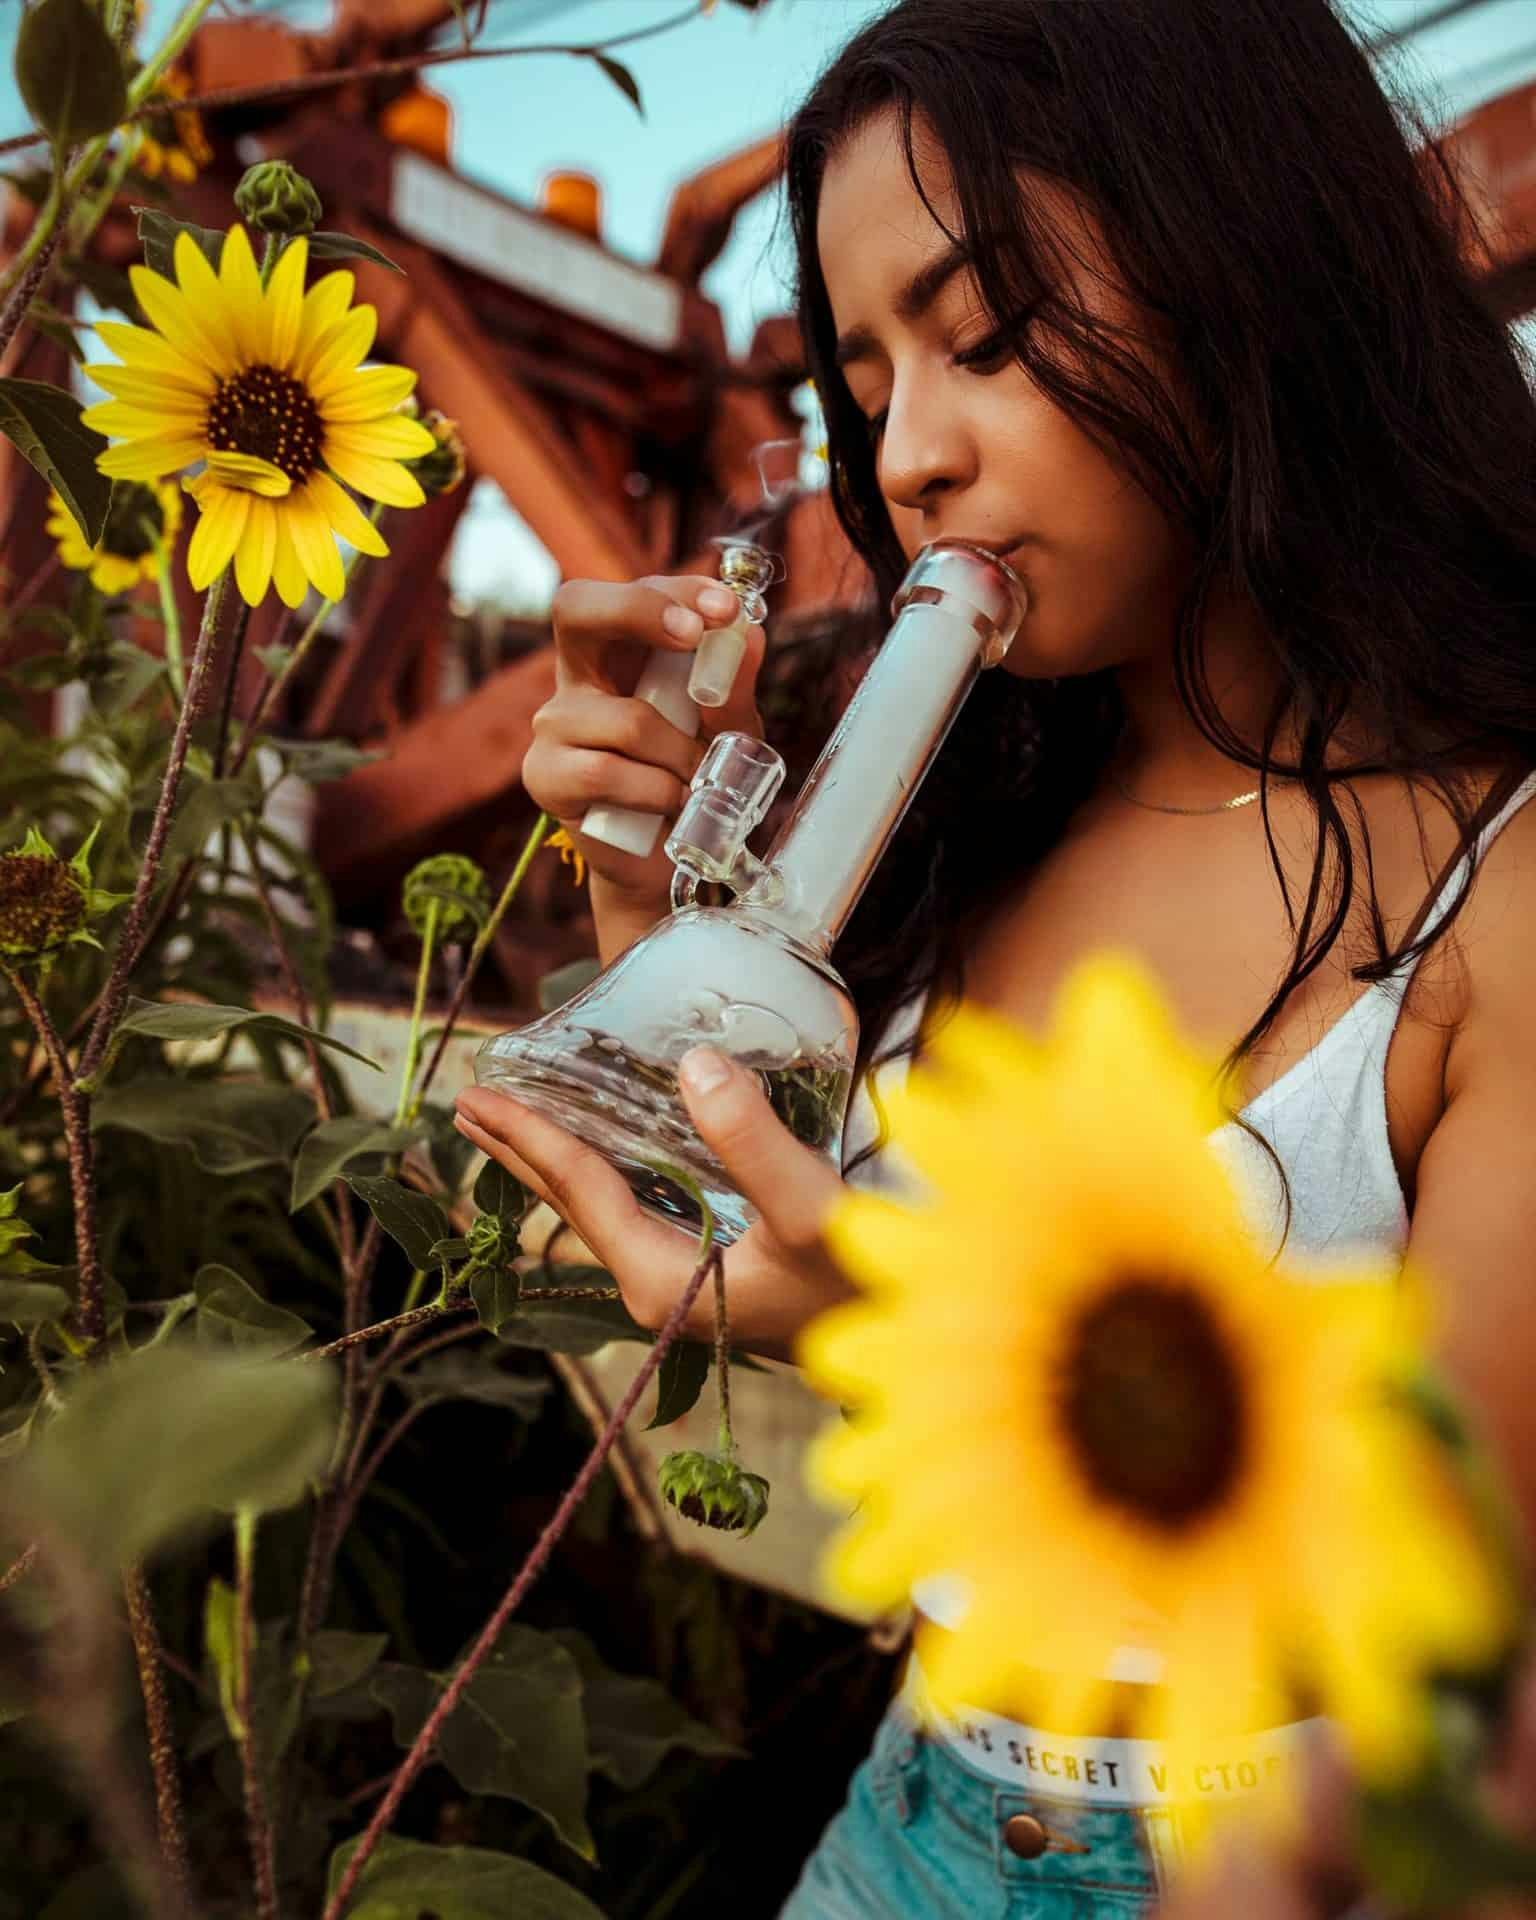 photo of a girl ripping a bong with sunflowers around her